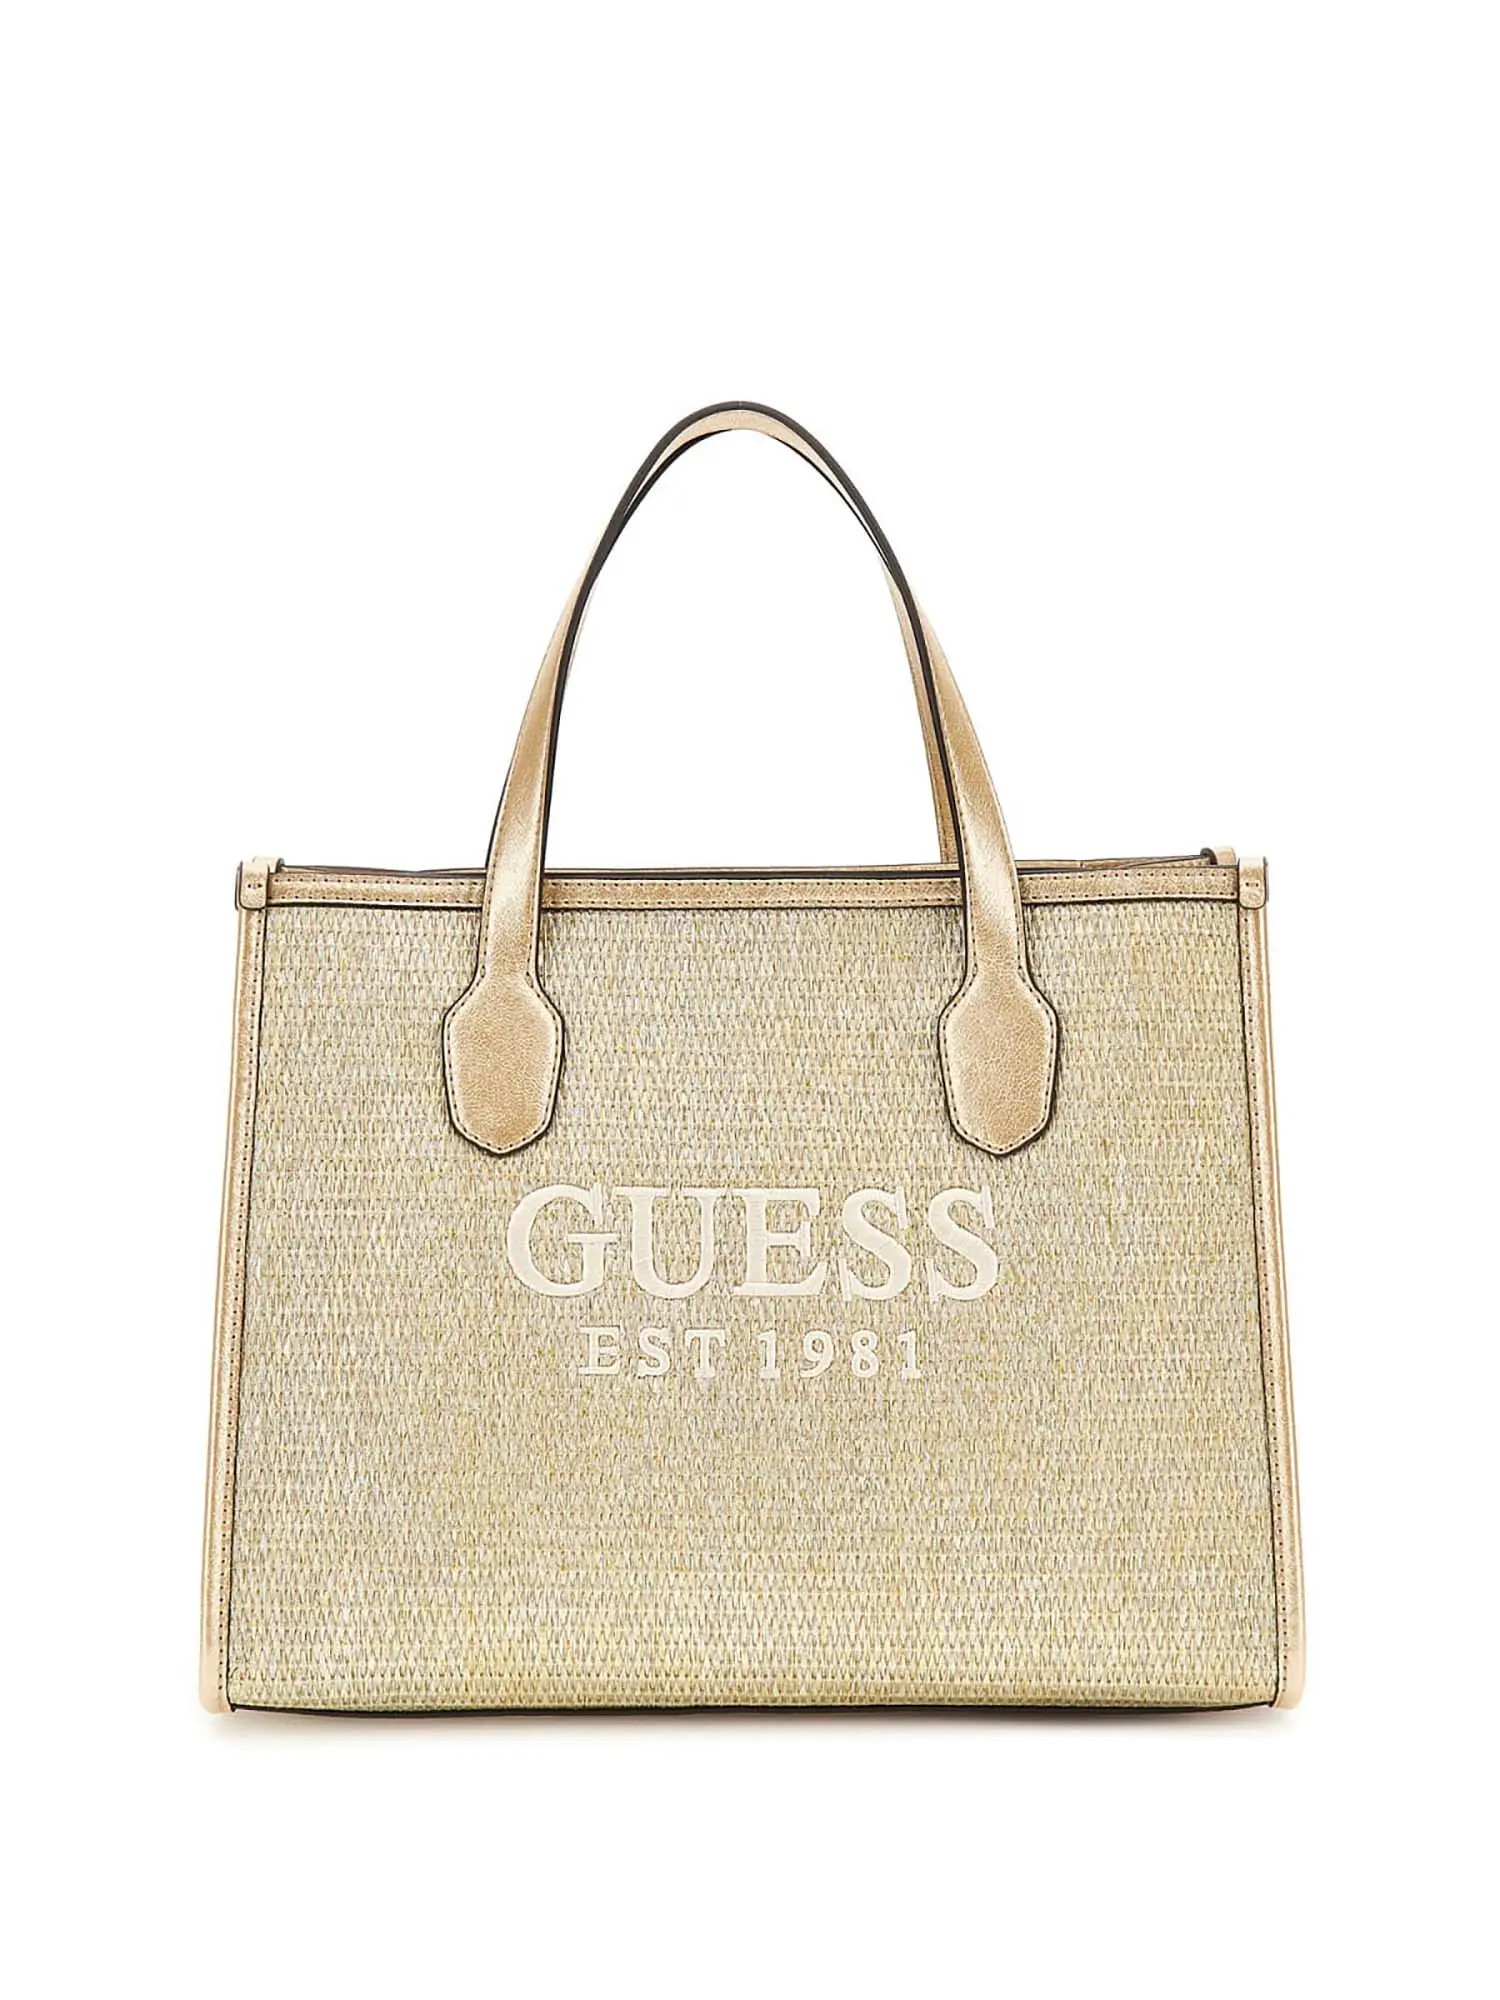 TOTE DONNA - GUESS - HWWG86 65220 - ORO, UNICA